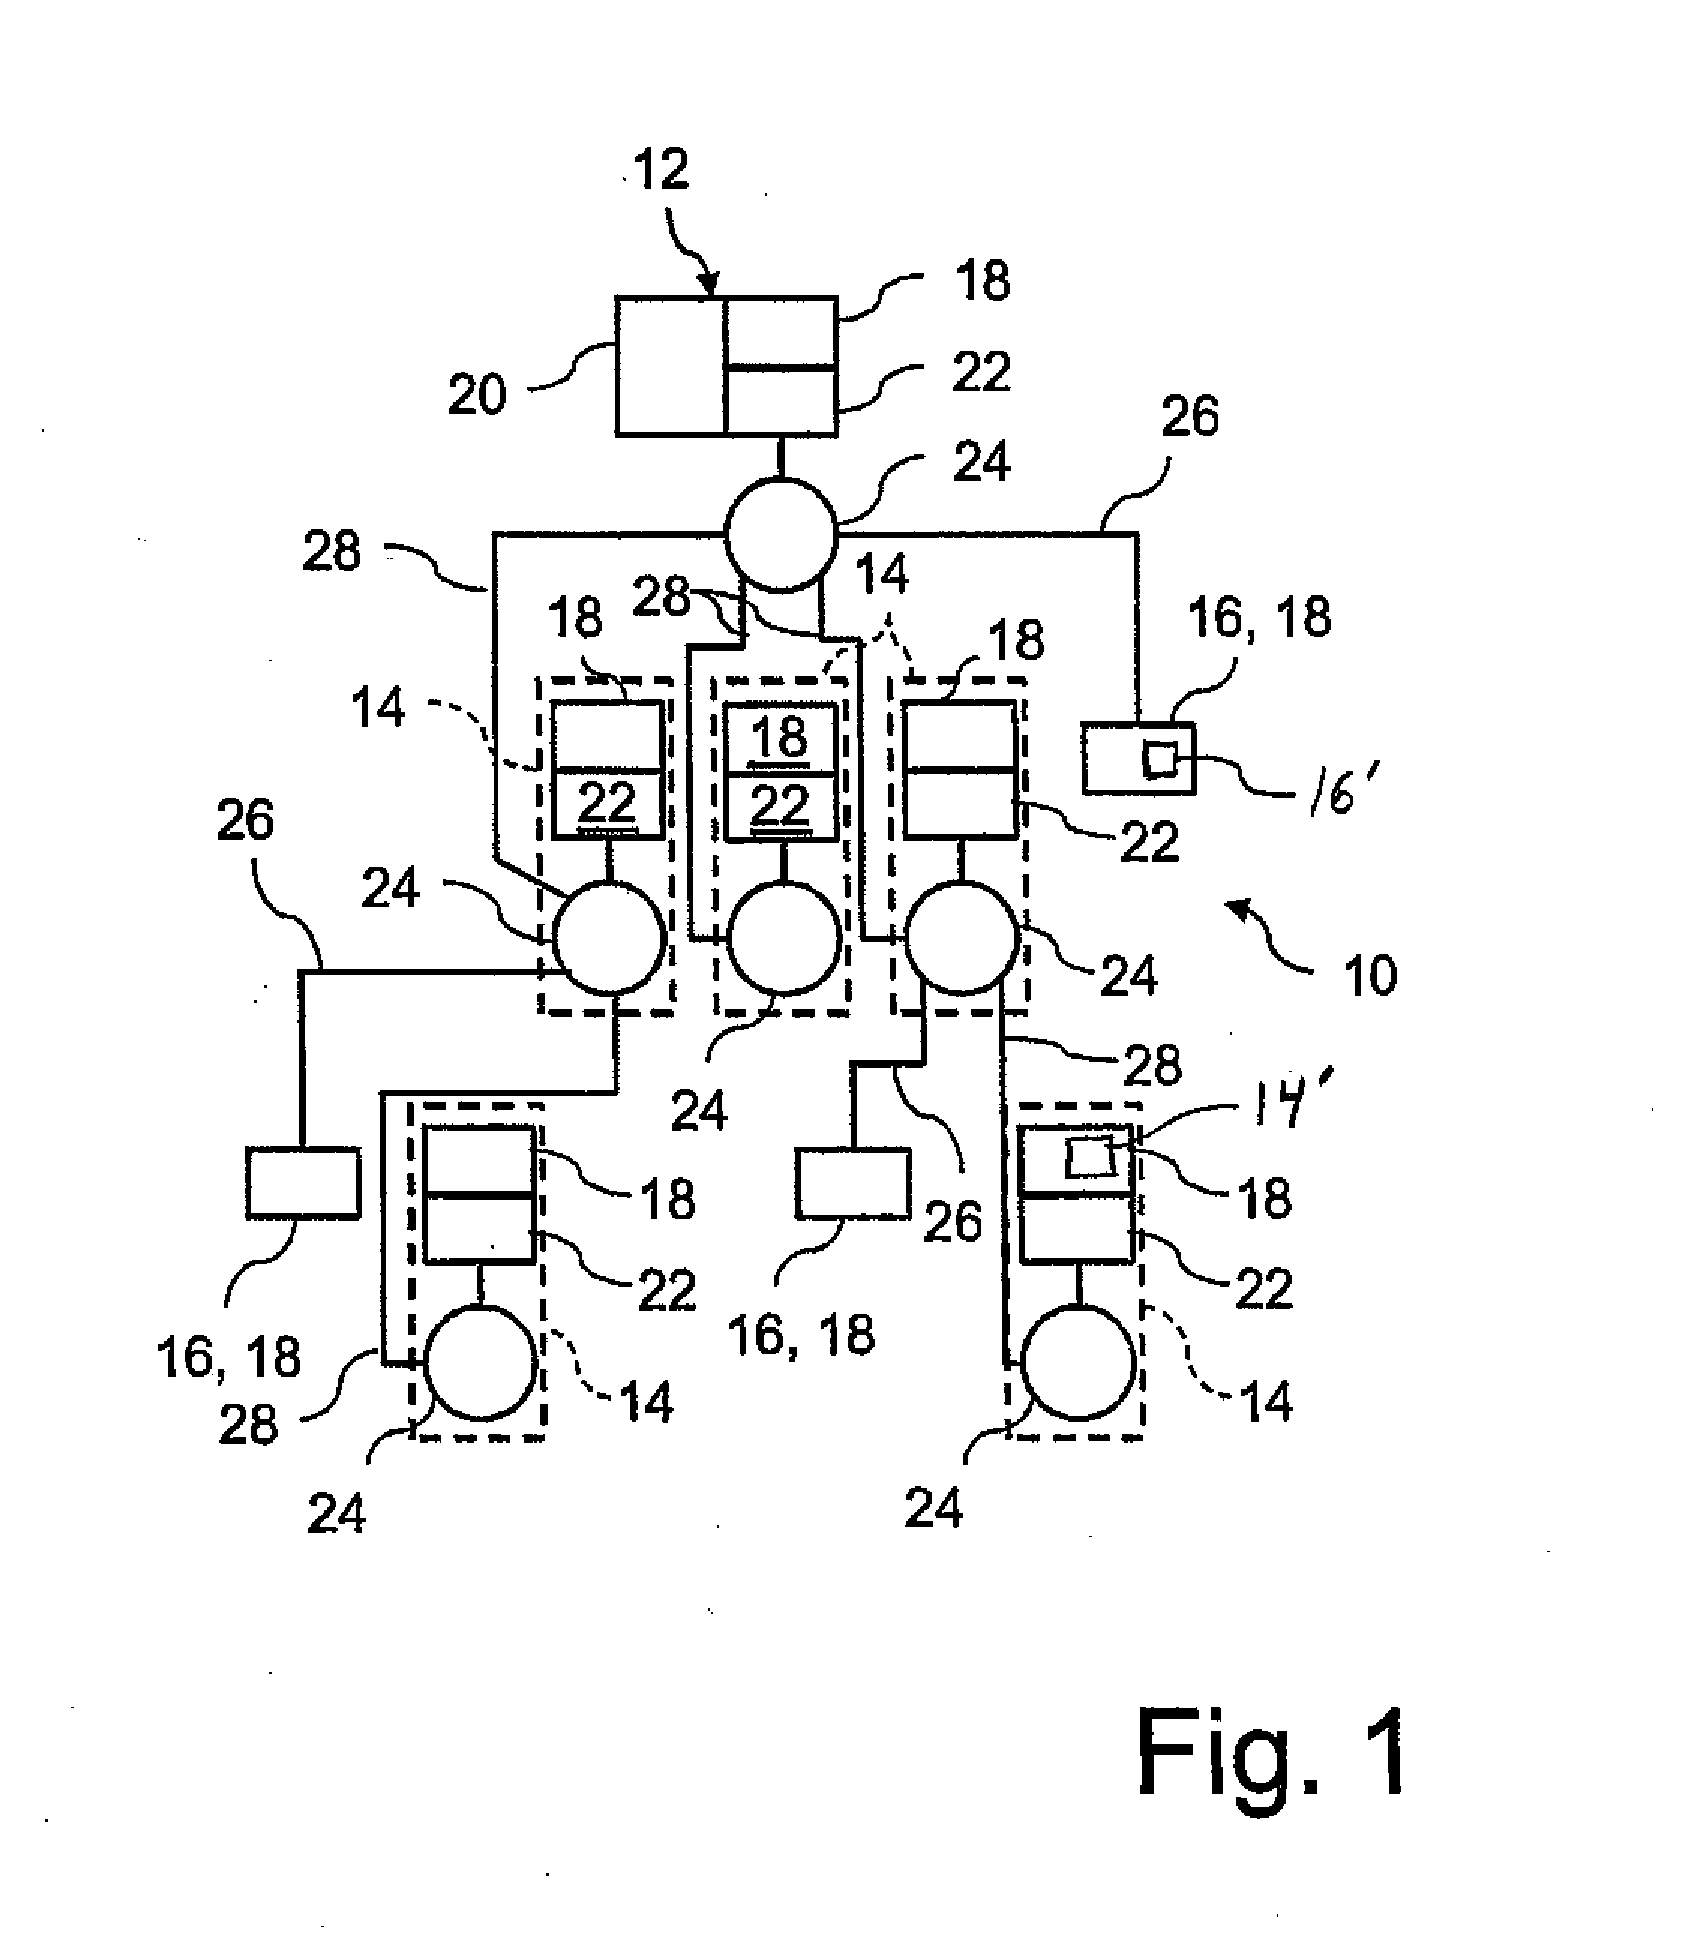 Method For Activating A Network Component Of A Vehicle Network System